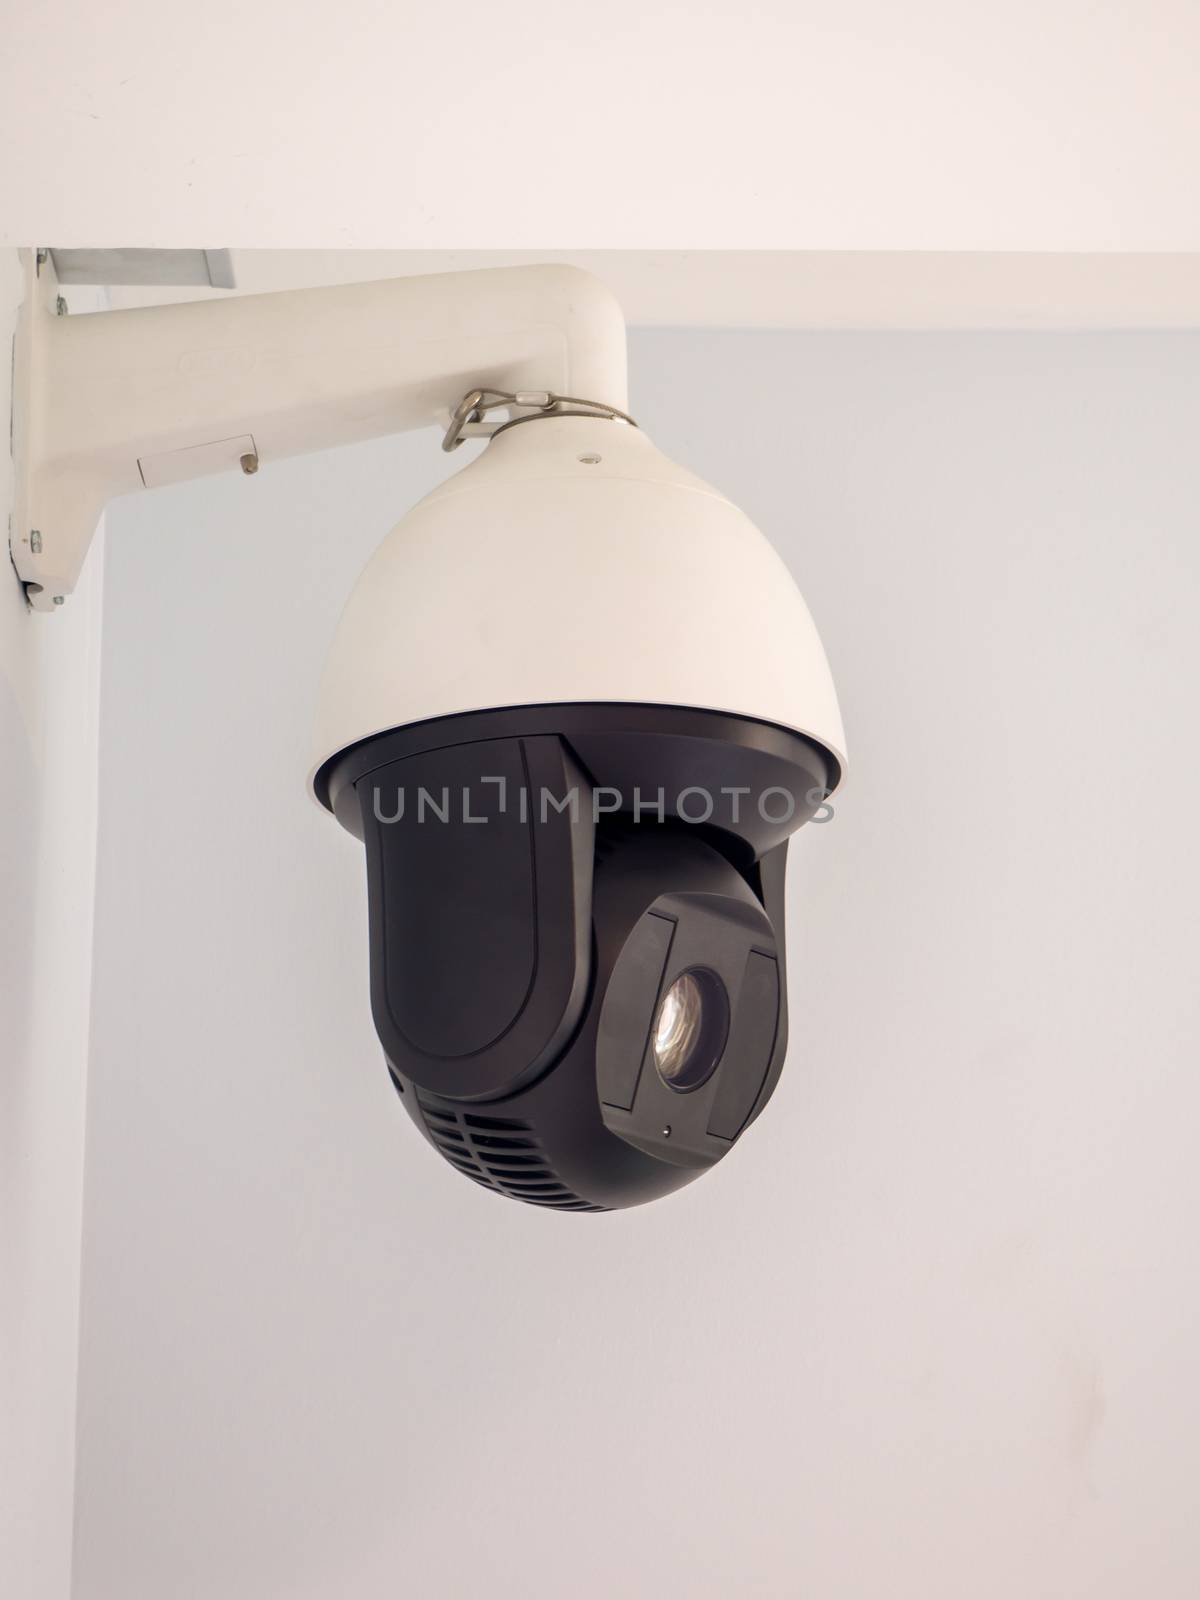 the Security CCTV camera or surveillance system in office building